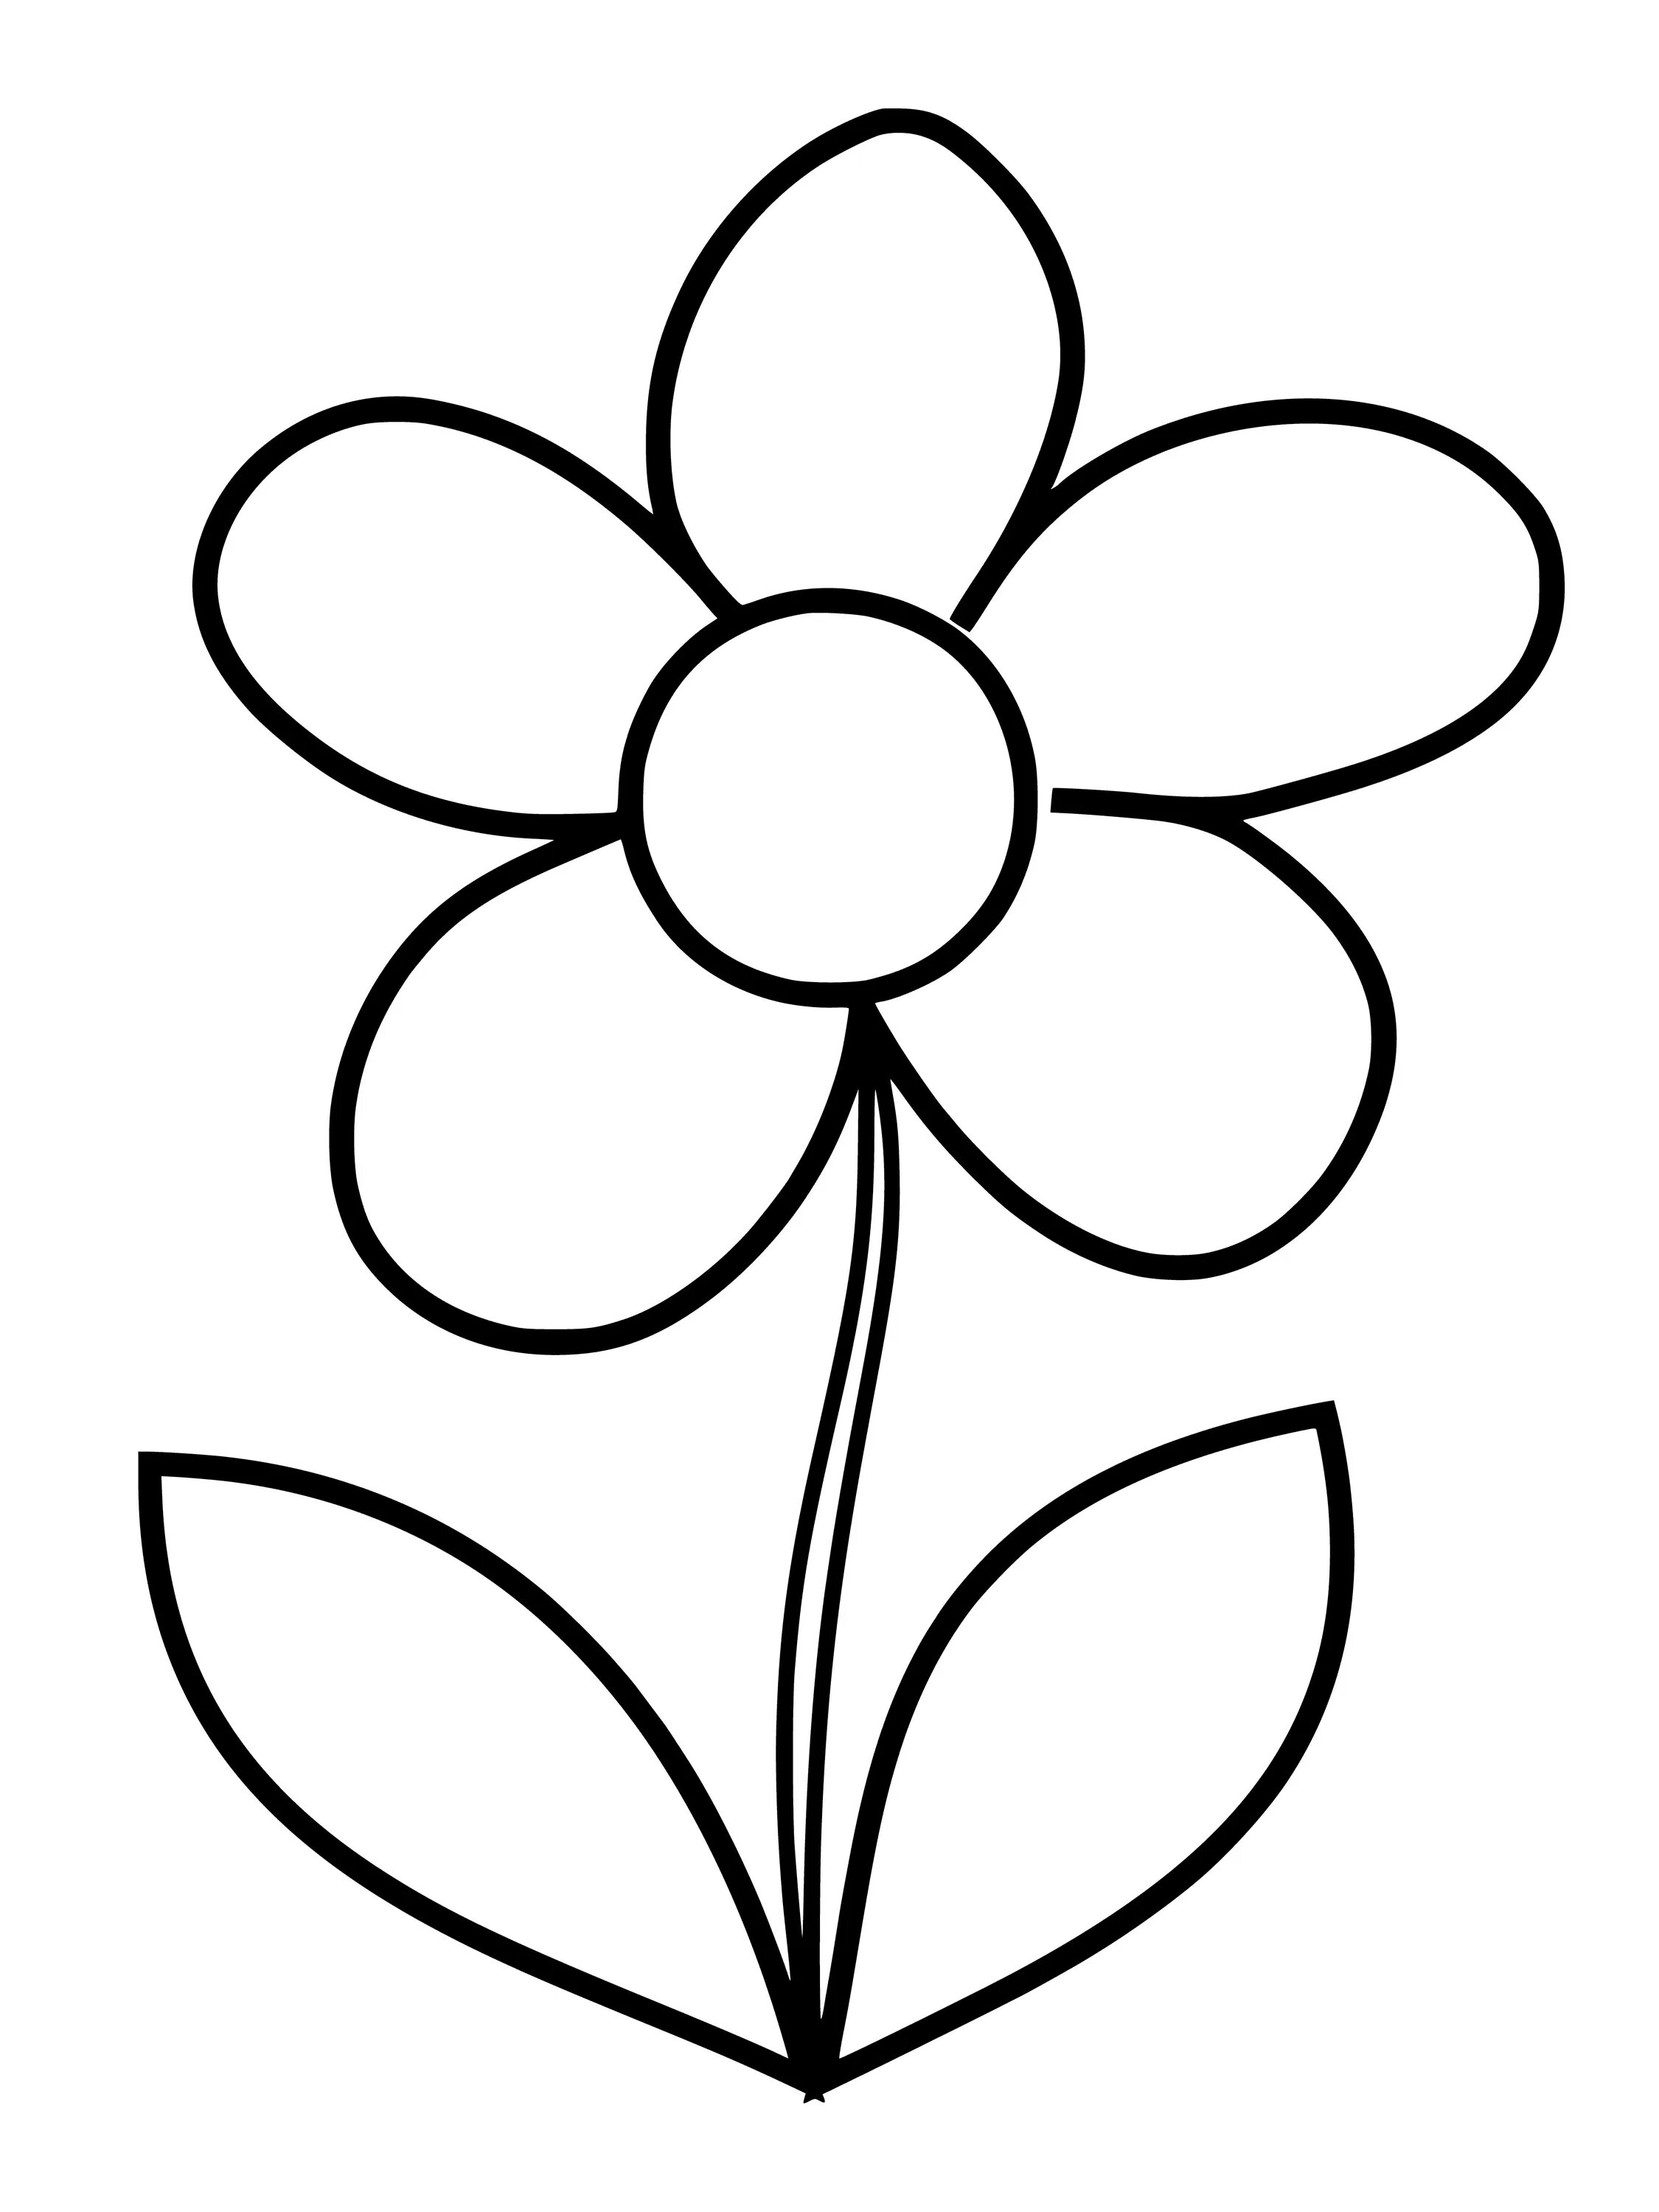 Living drawing of flowers for children